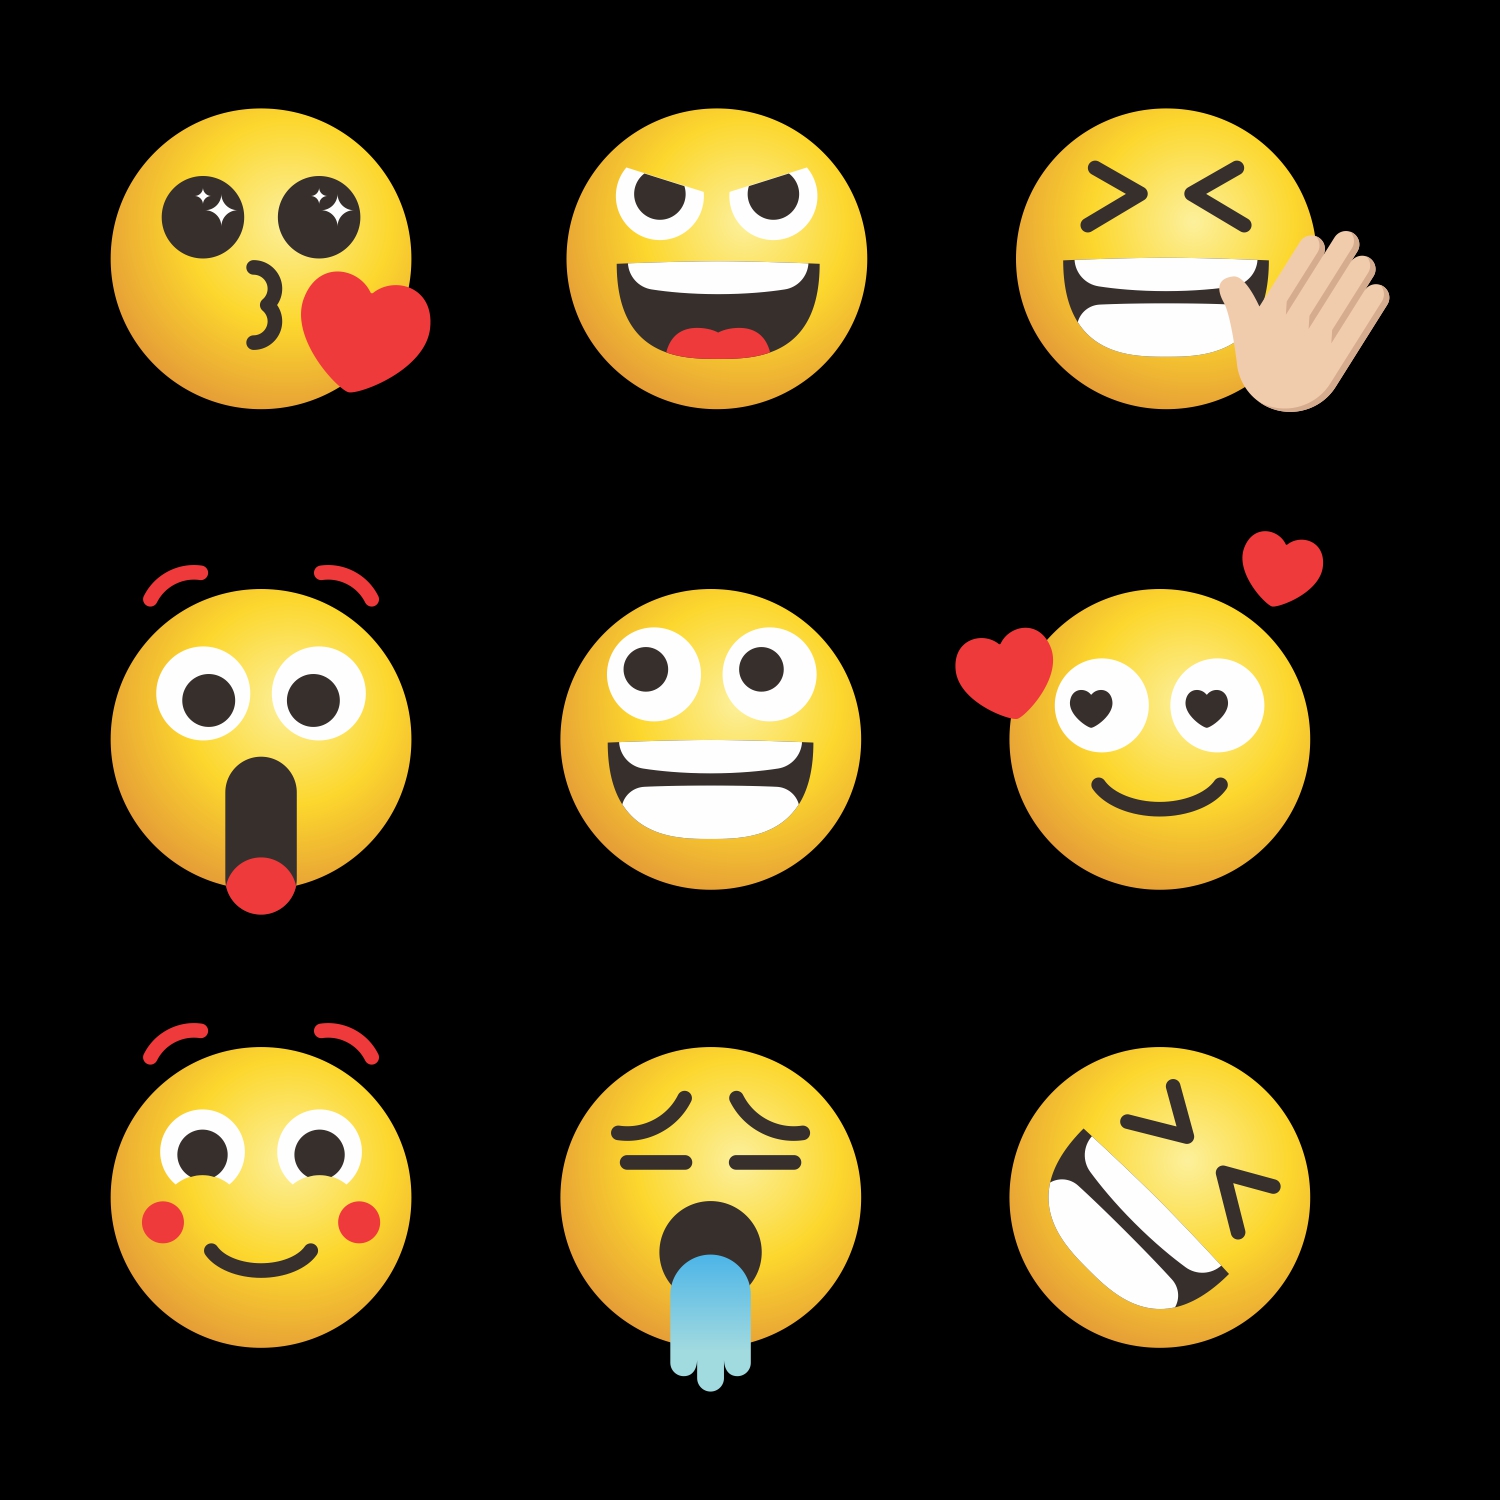 free vector cute emoticons faces feeling vector set for social media CDR file download for free